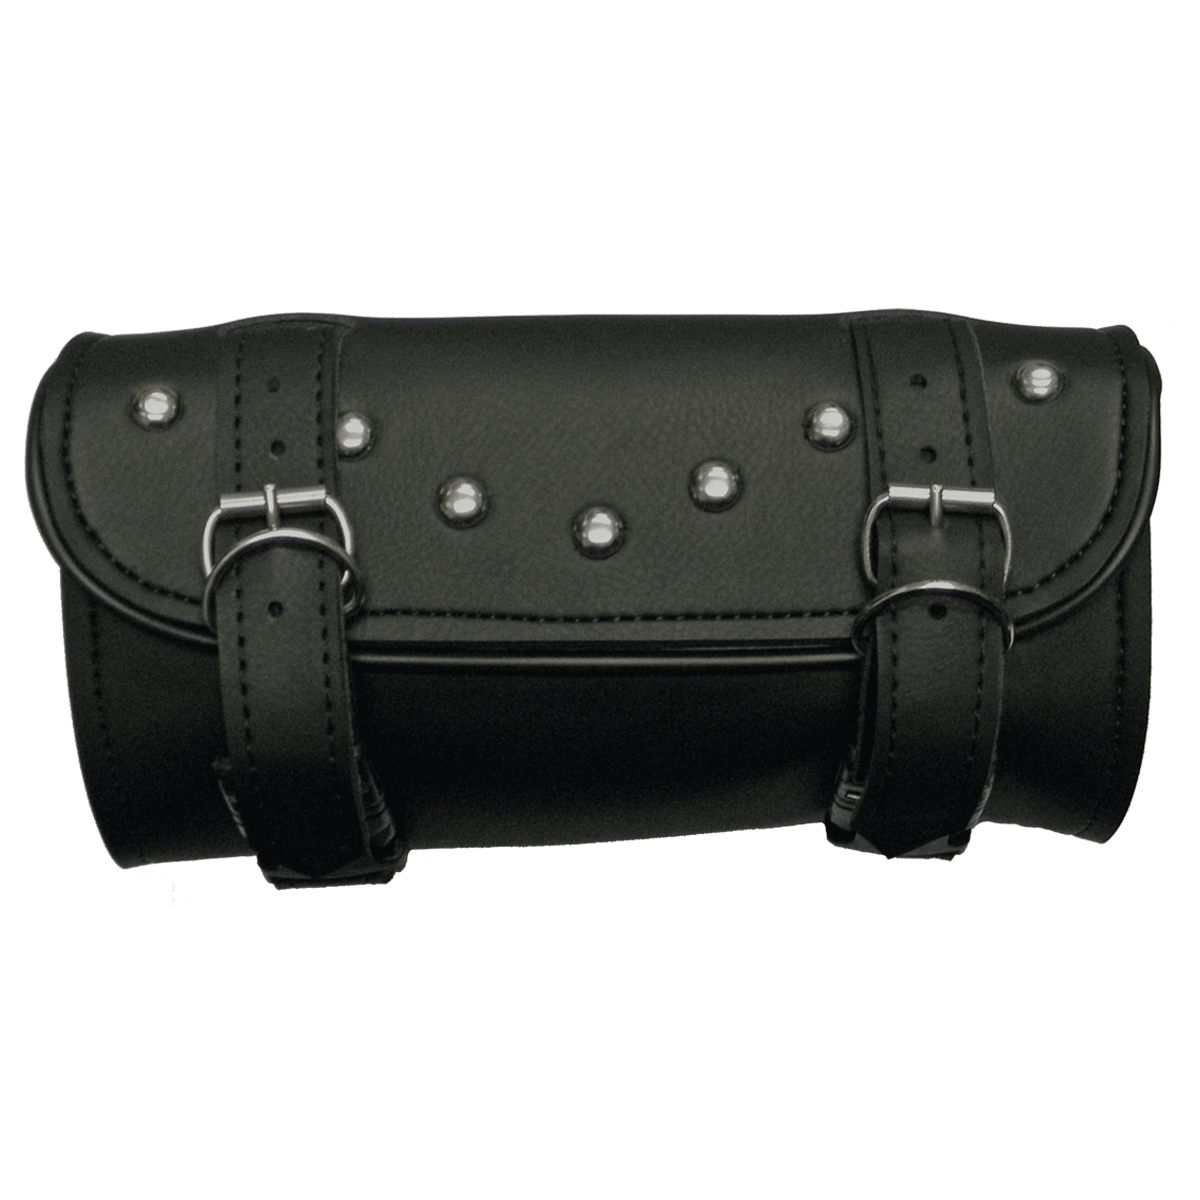 VS108 2 Strap Studded Tool Bag with Quick Releases